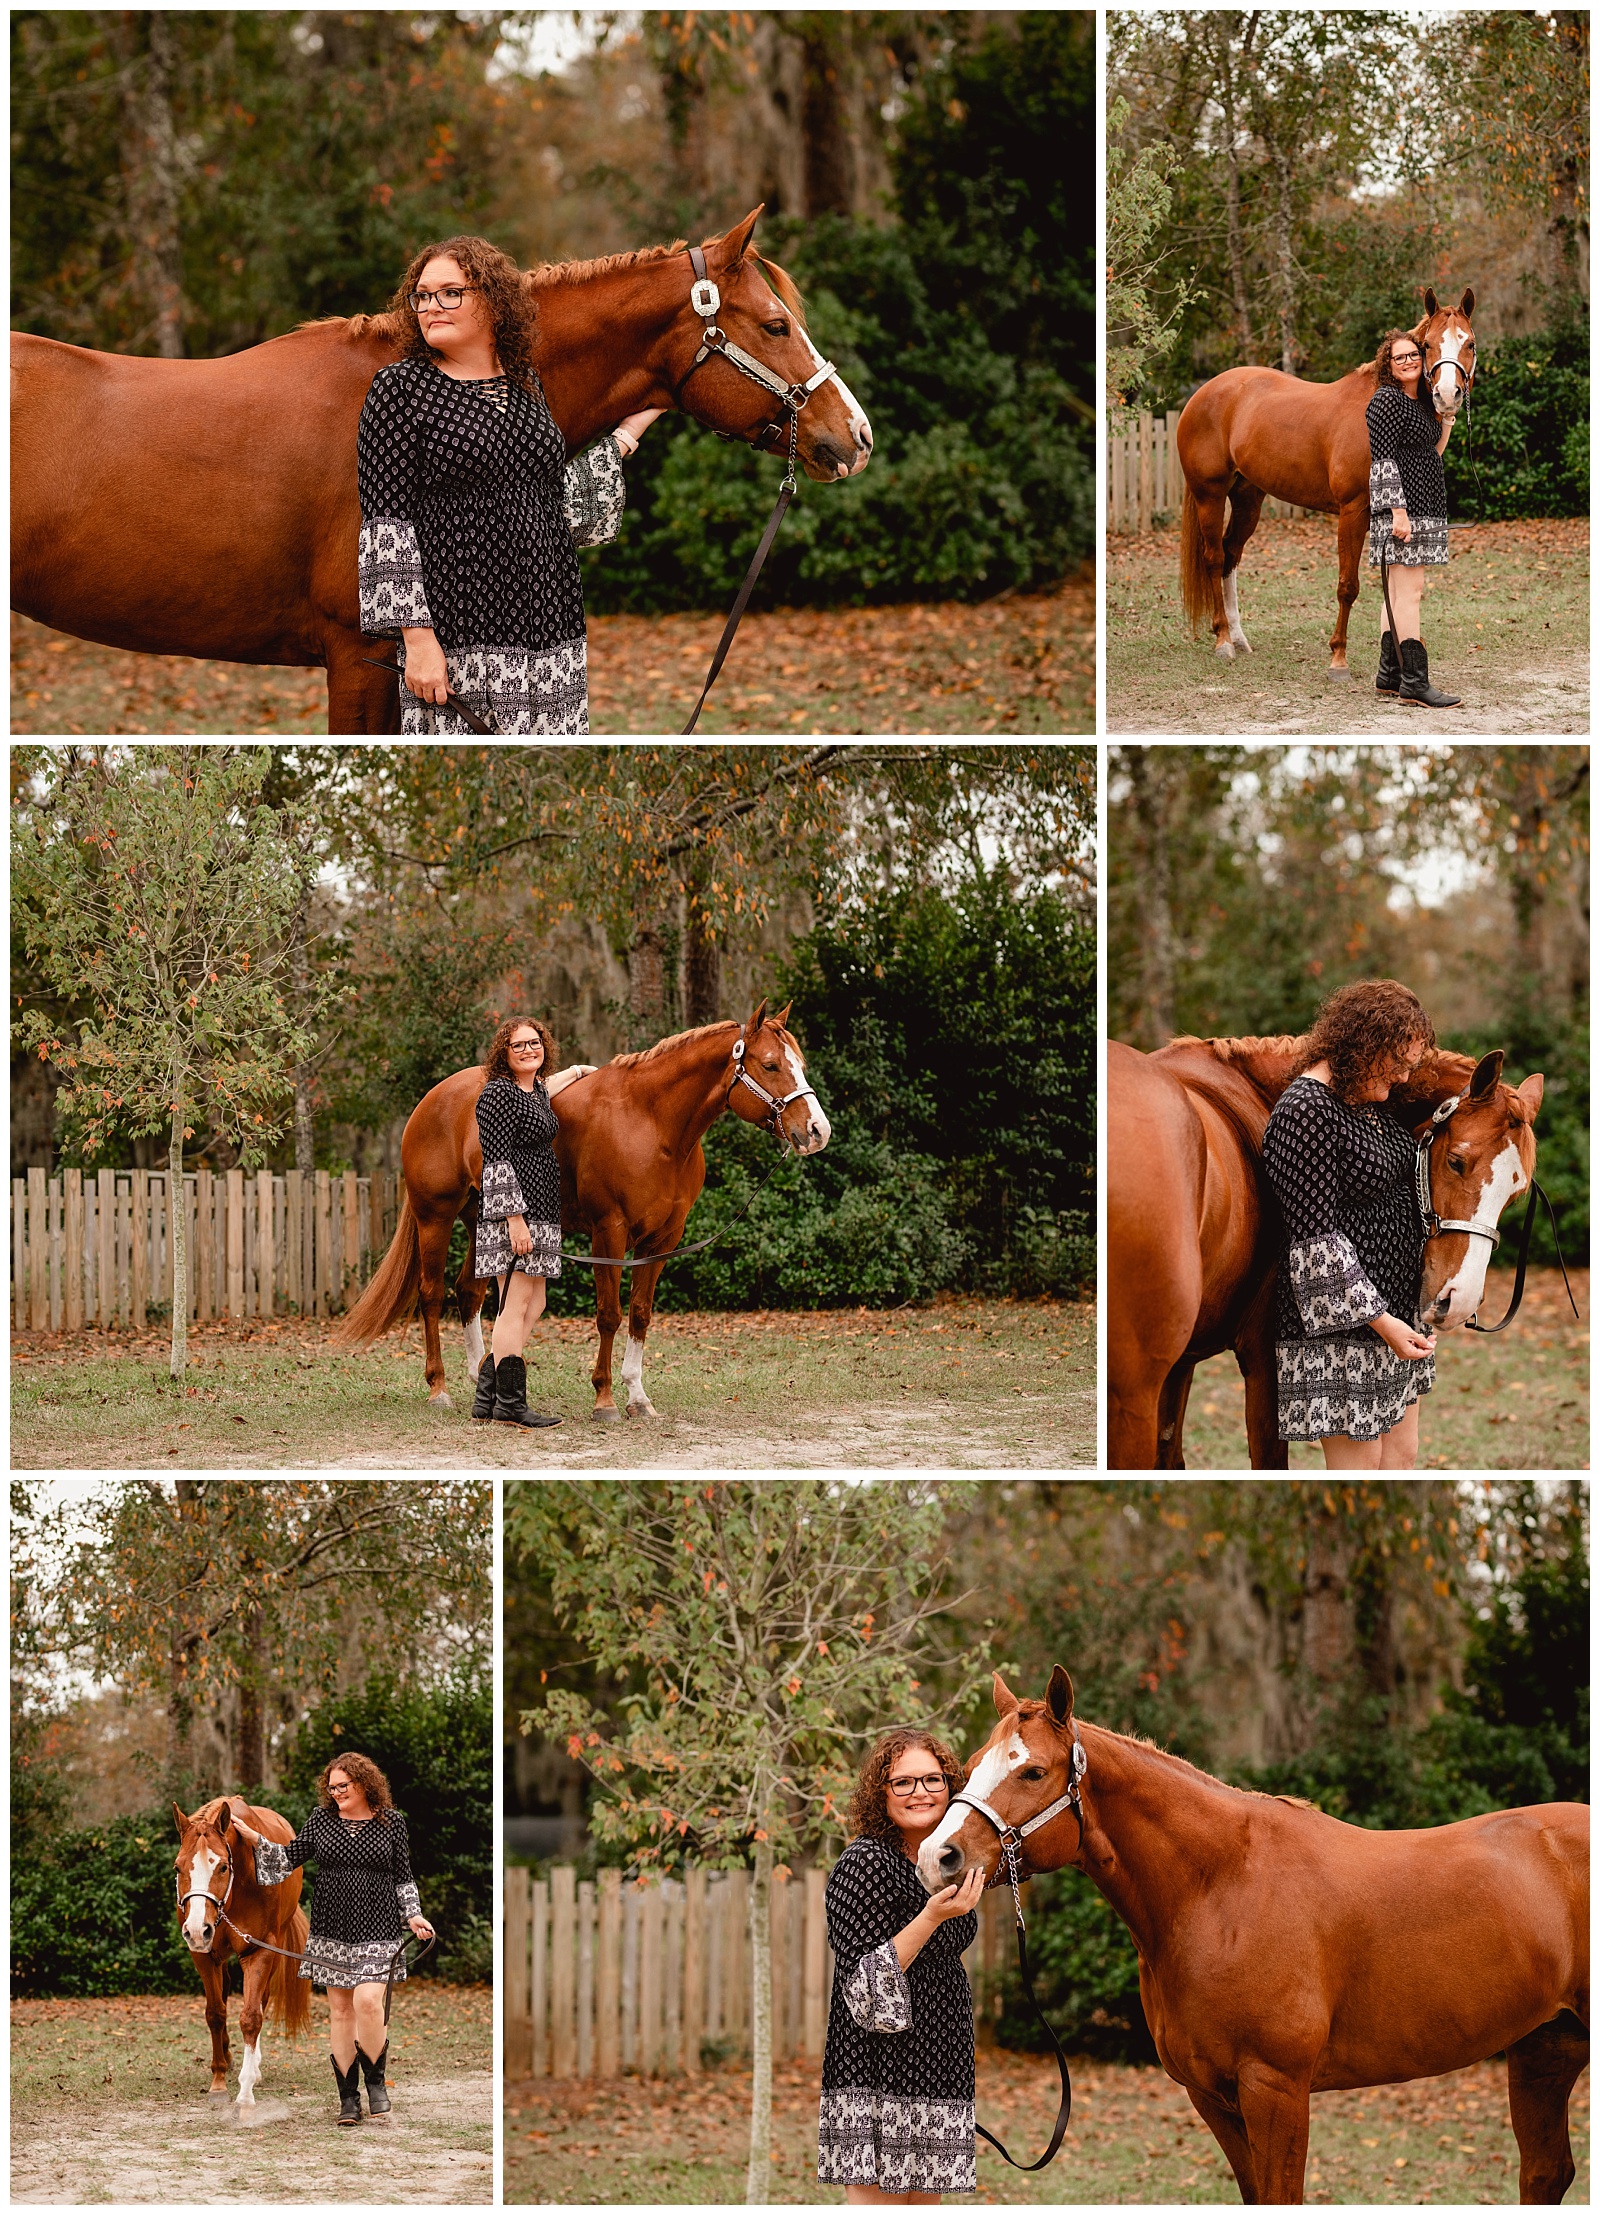 Western horse and rider photoshoot near Jacksonville, FL by professional photographer.